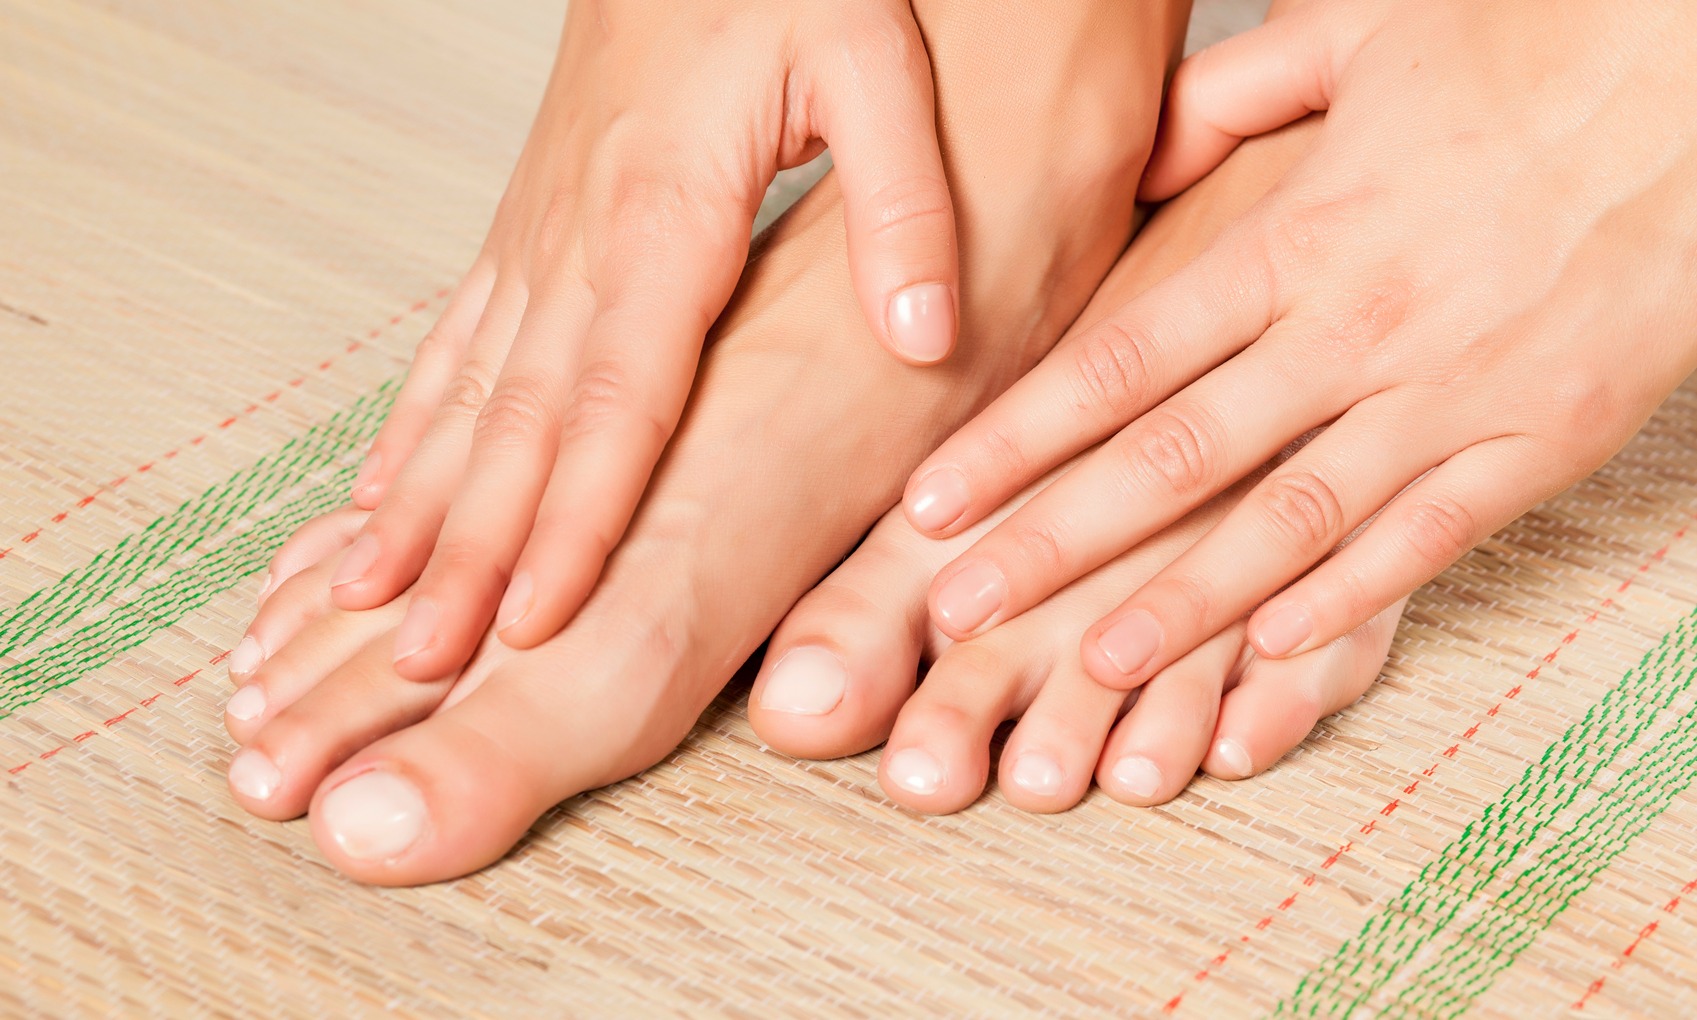 Burning feet syndrome: what it is, causes and how to treat it